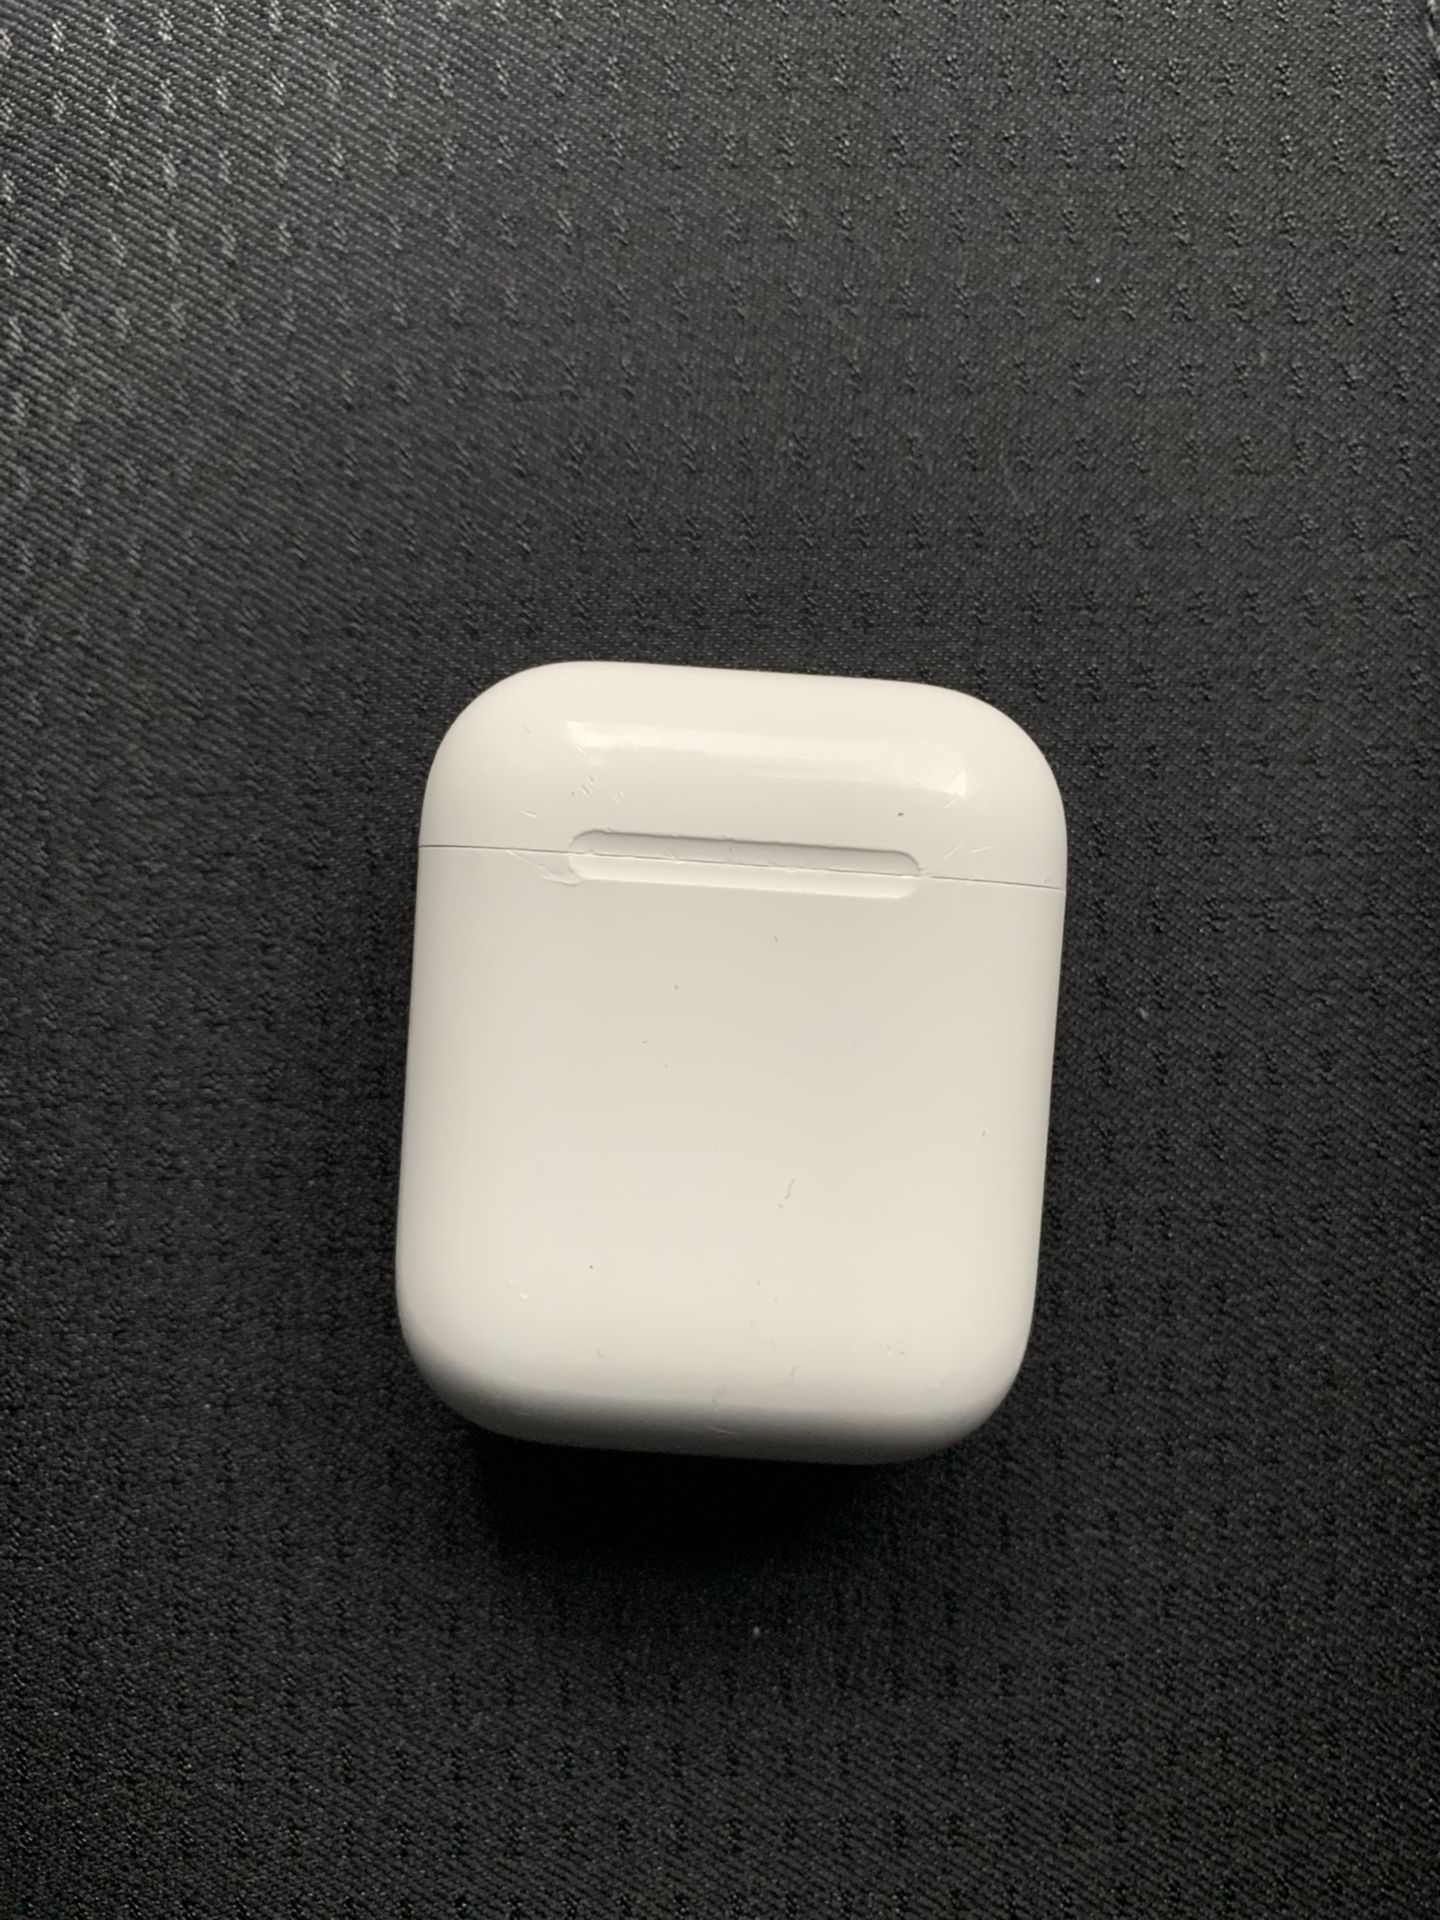 apple airpods only case $65